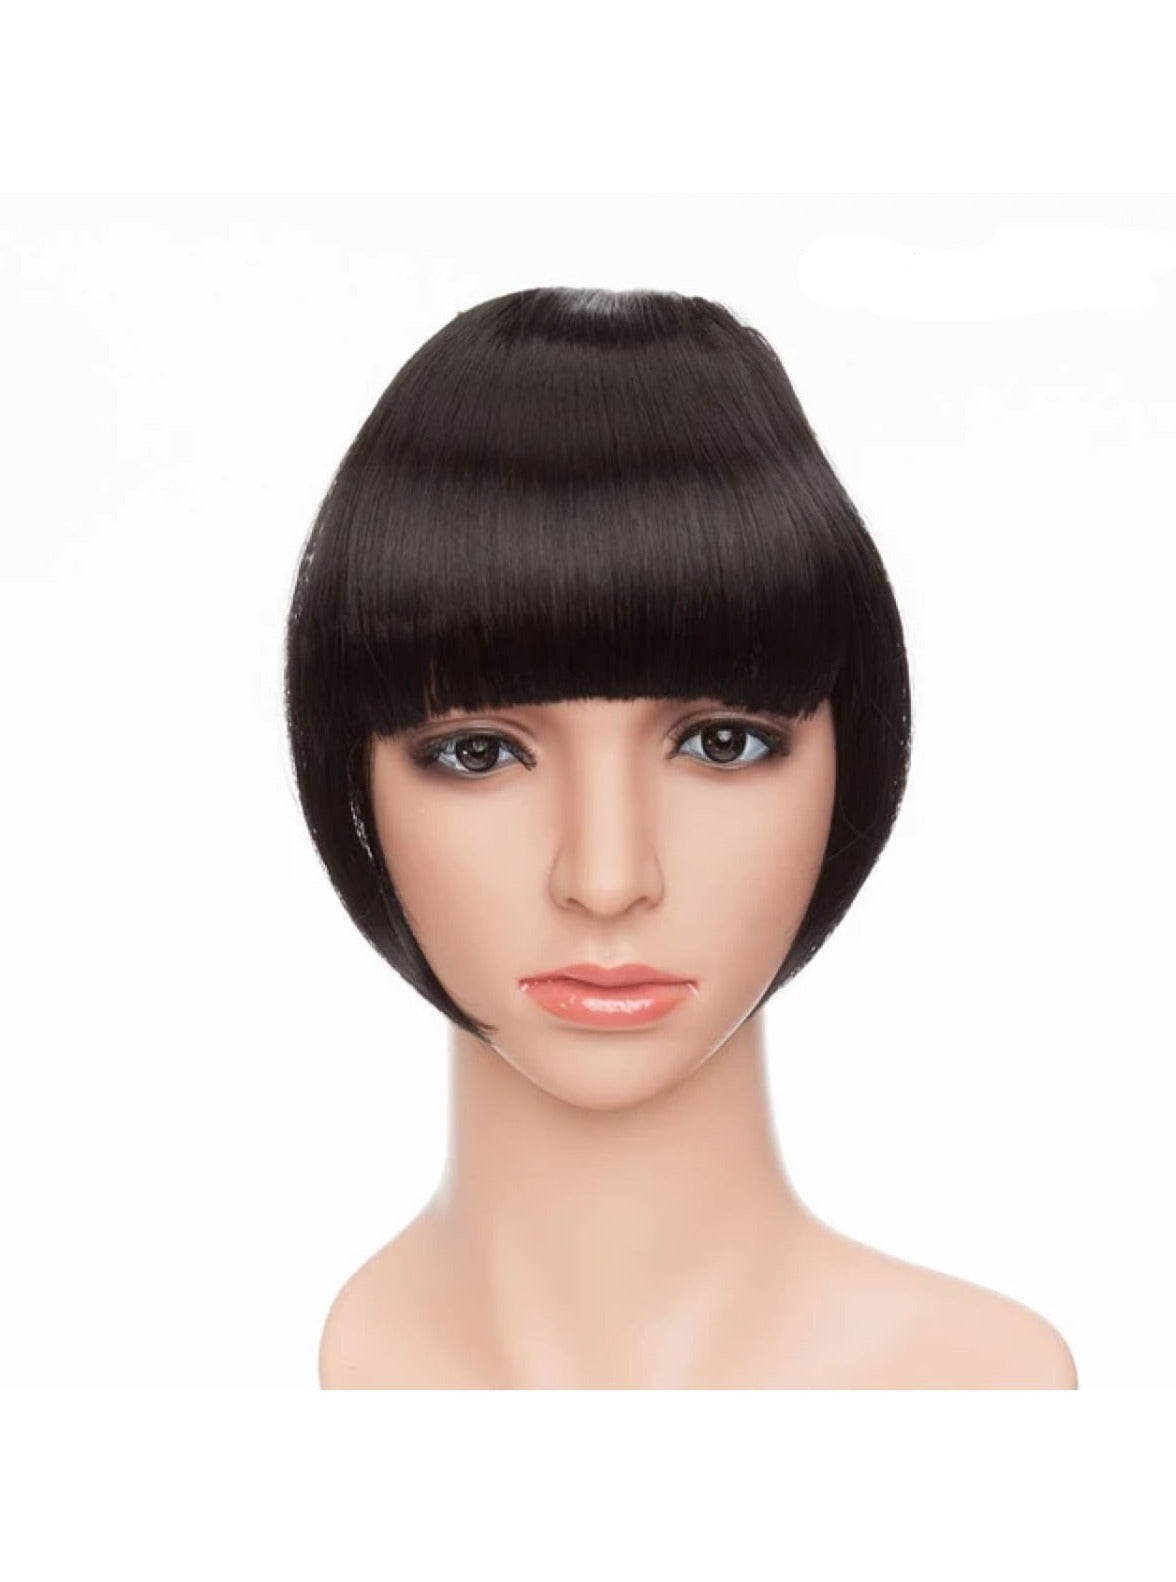 Girls Synthetic Removable Clip-On Bangs - Natural Black / One Size - Girls Halloween Costume